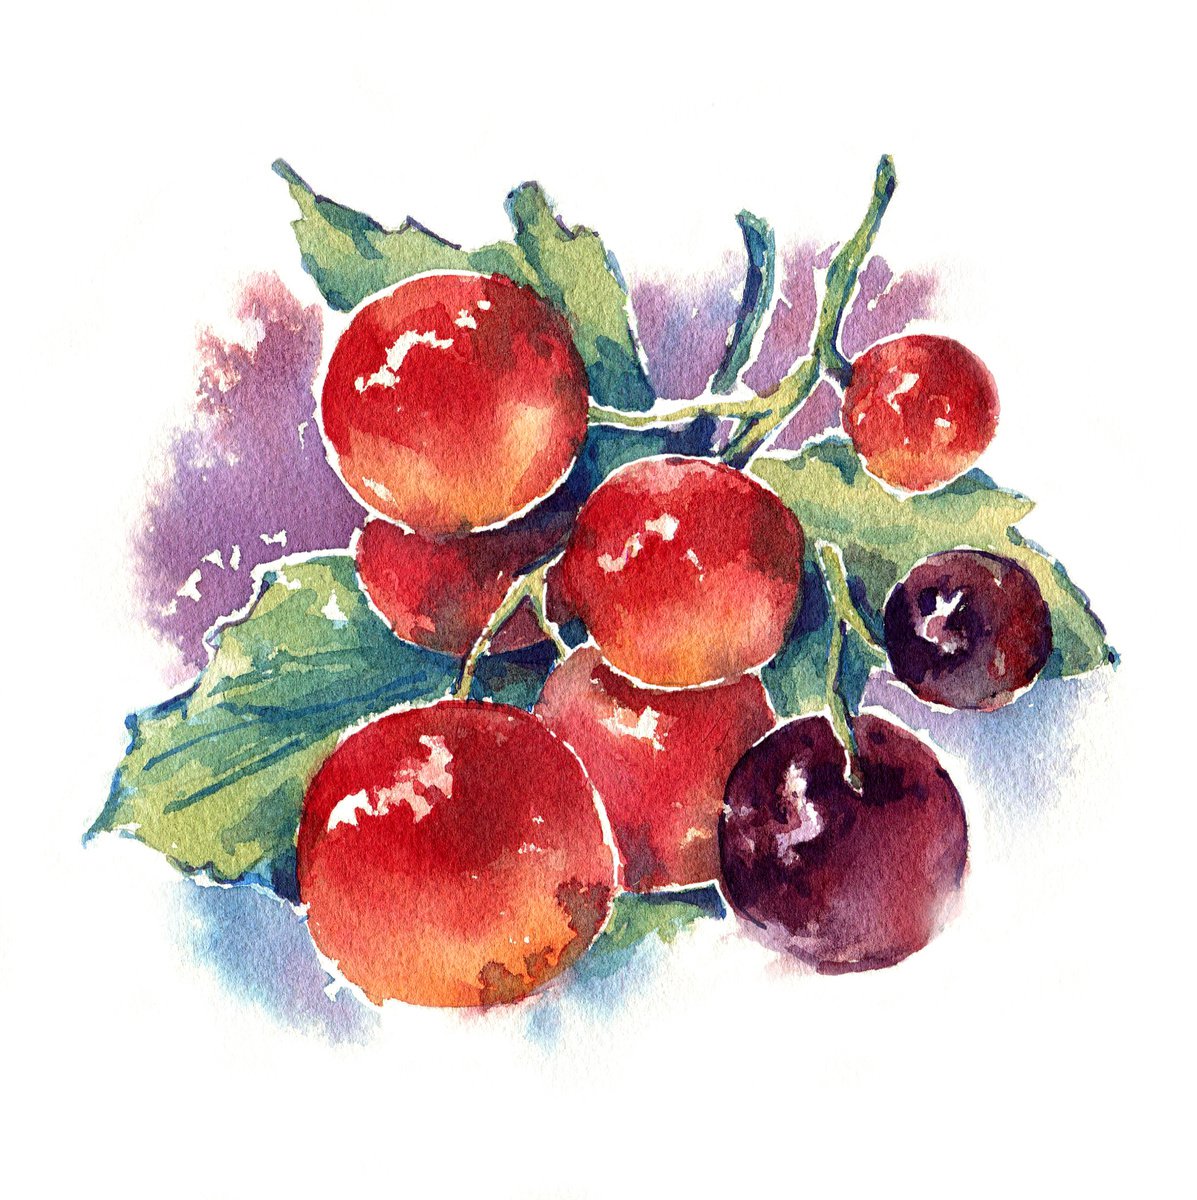 Currant from the series of watercolor illustrations Berries by Ksenia Selianko